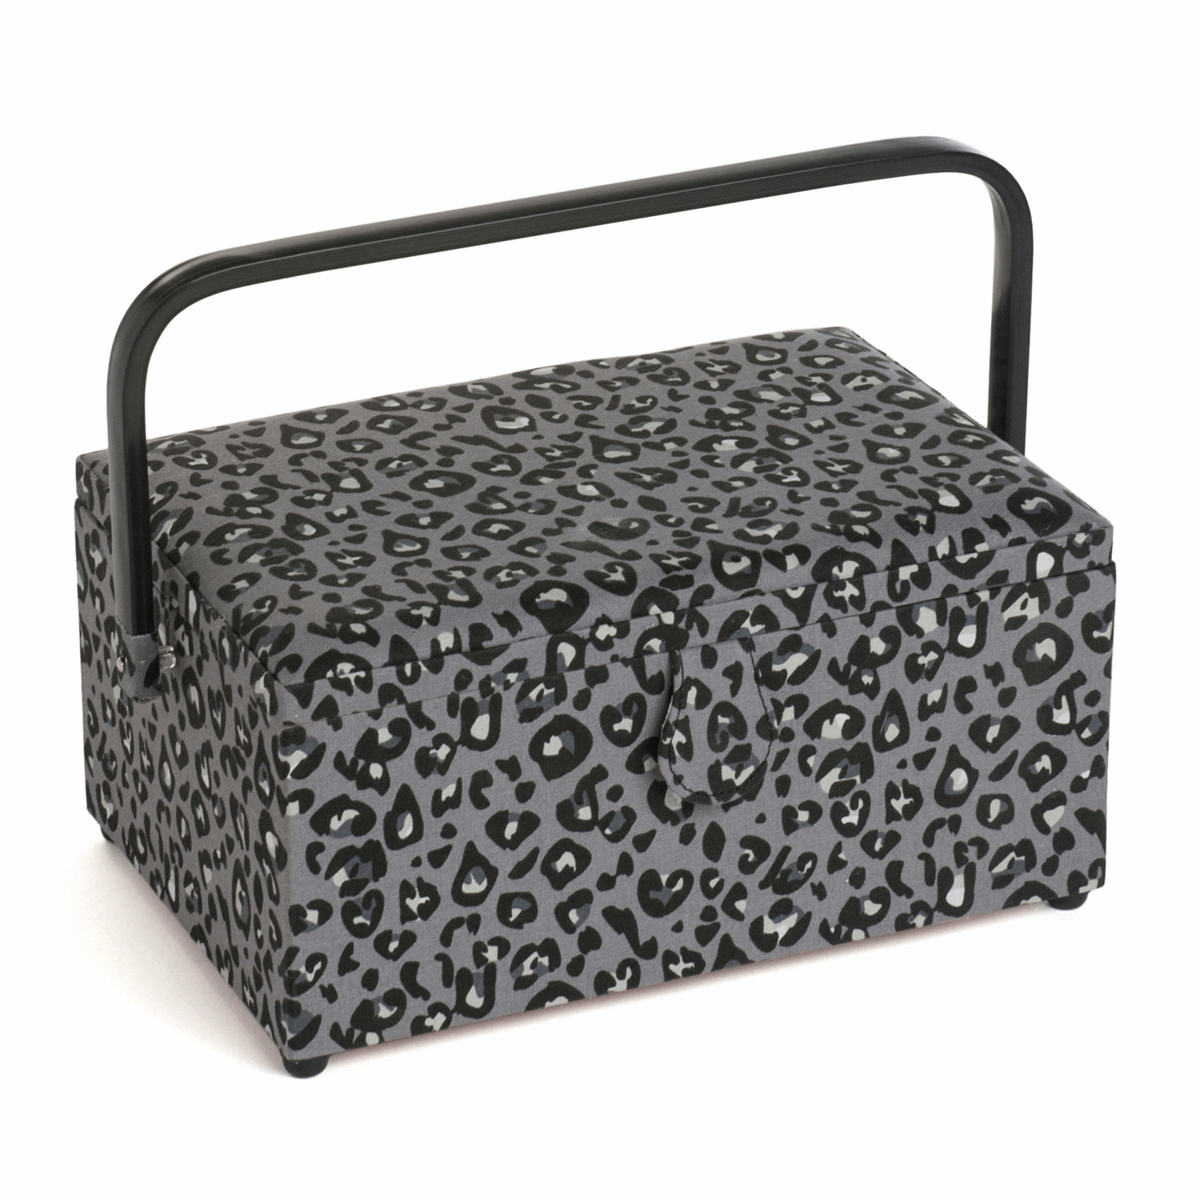 Leopard Cantilever Sewing Box - Large